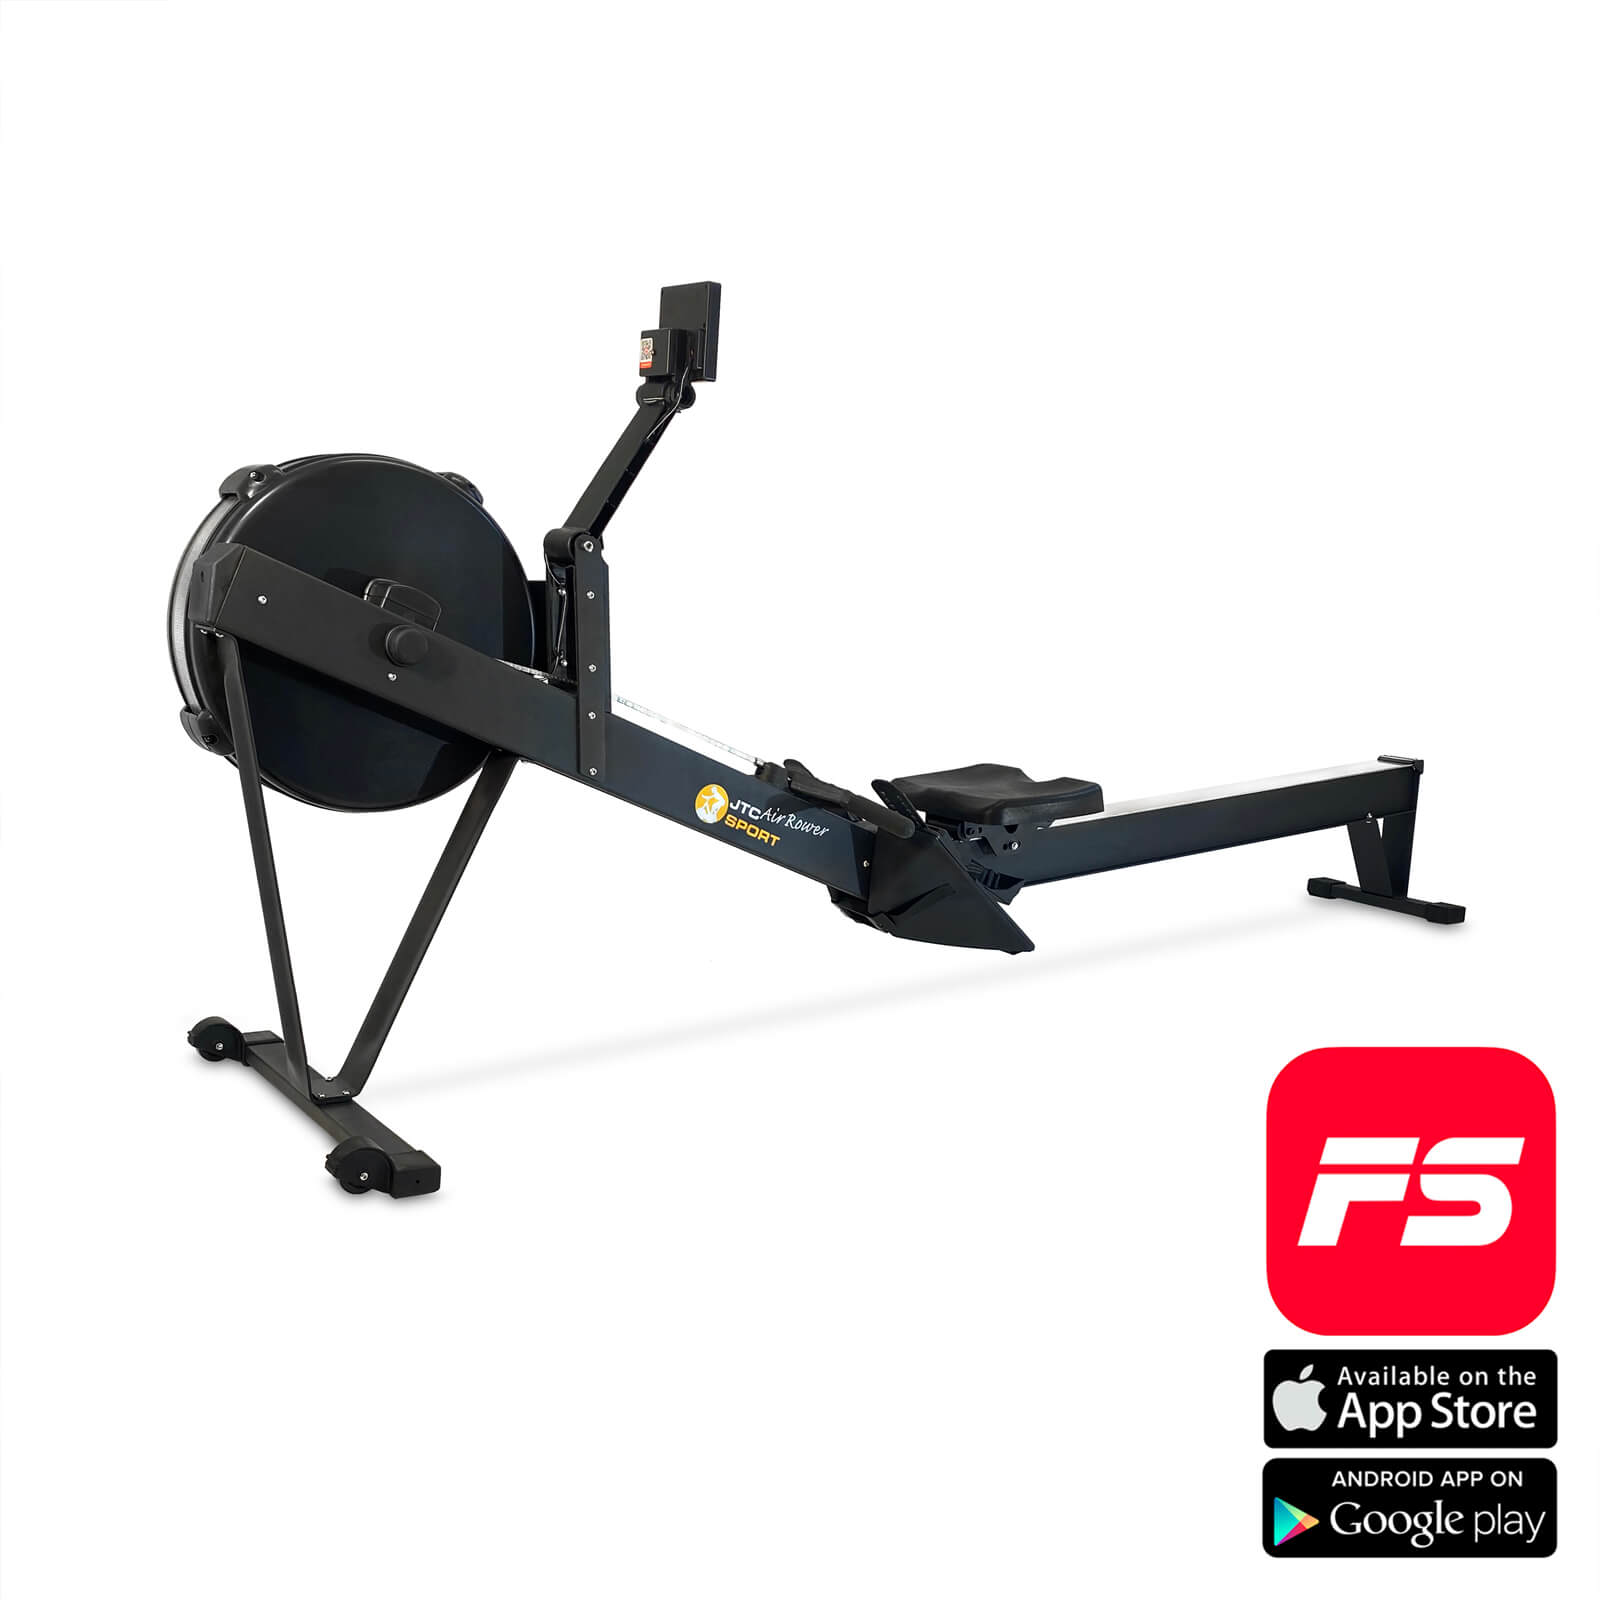 JTC Air Rower Pro